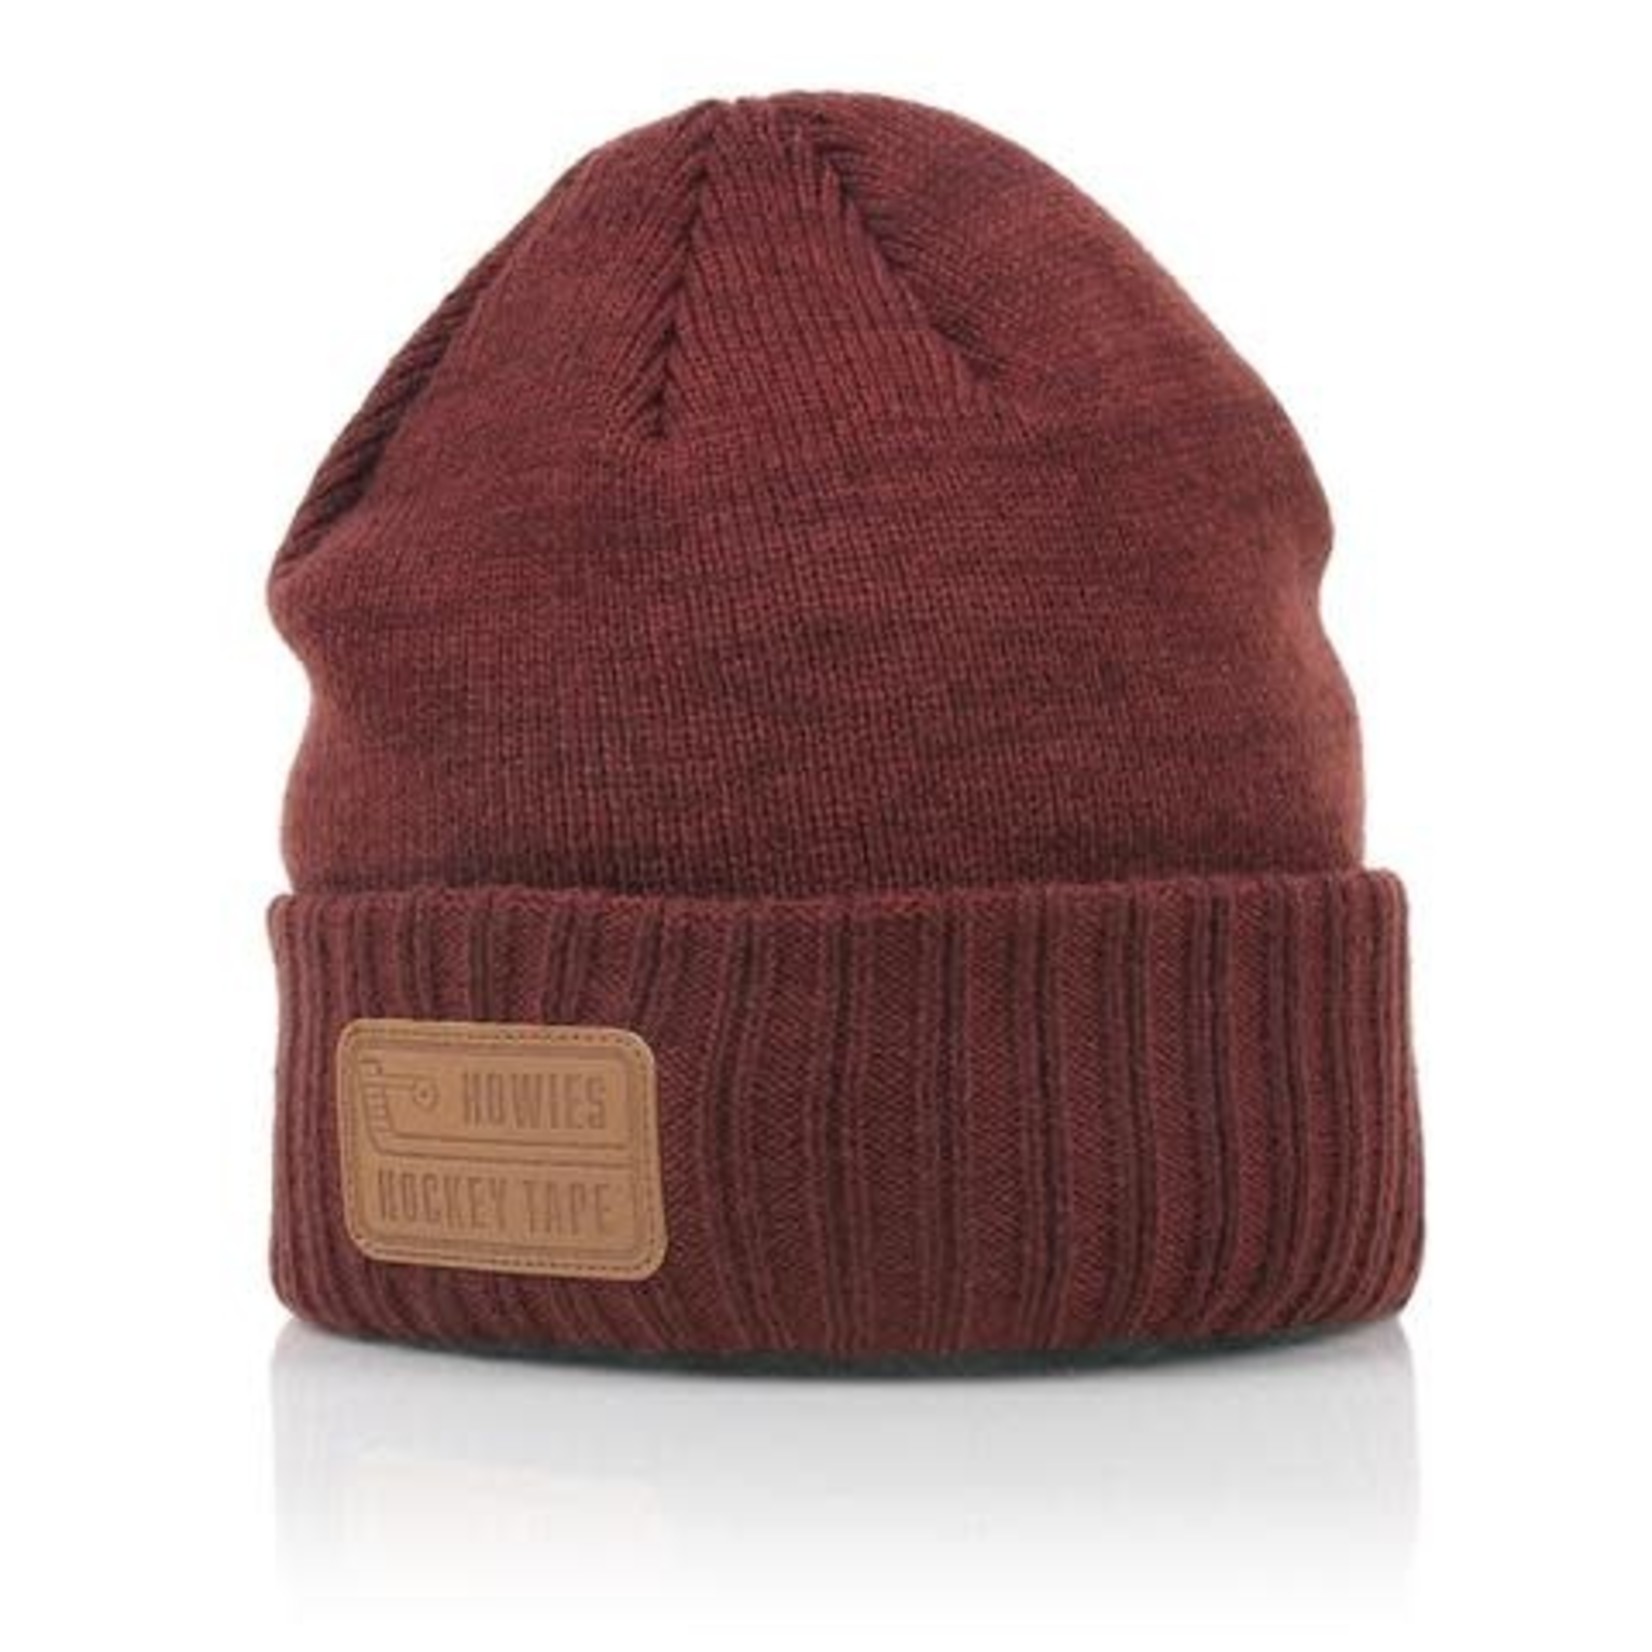 Howies Howies Toque, Polar Knit Cap